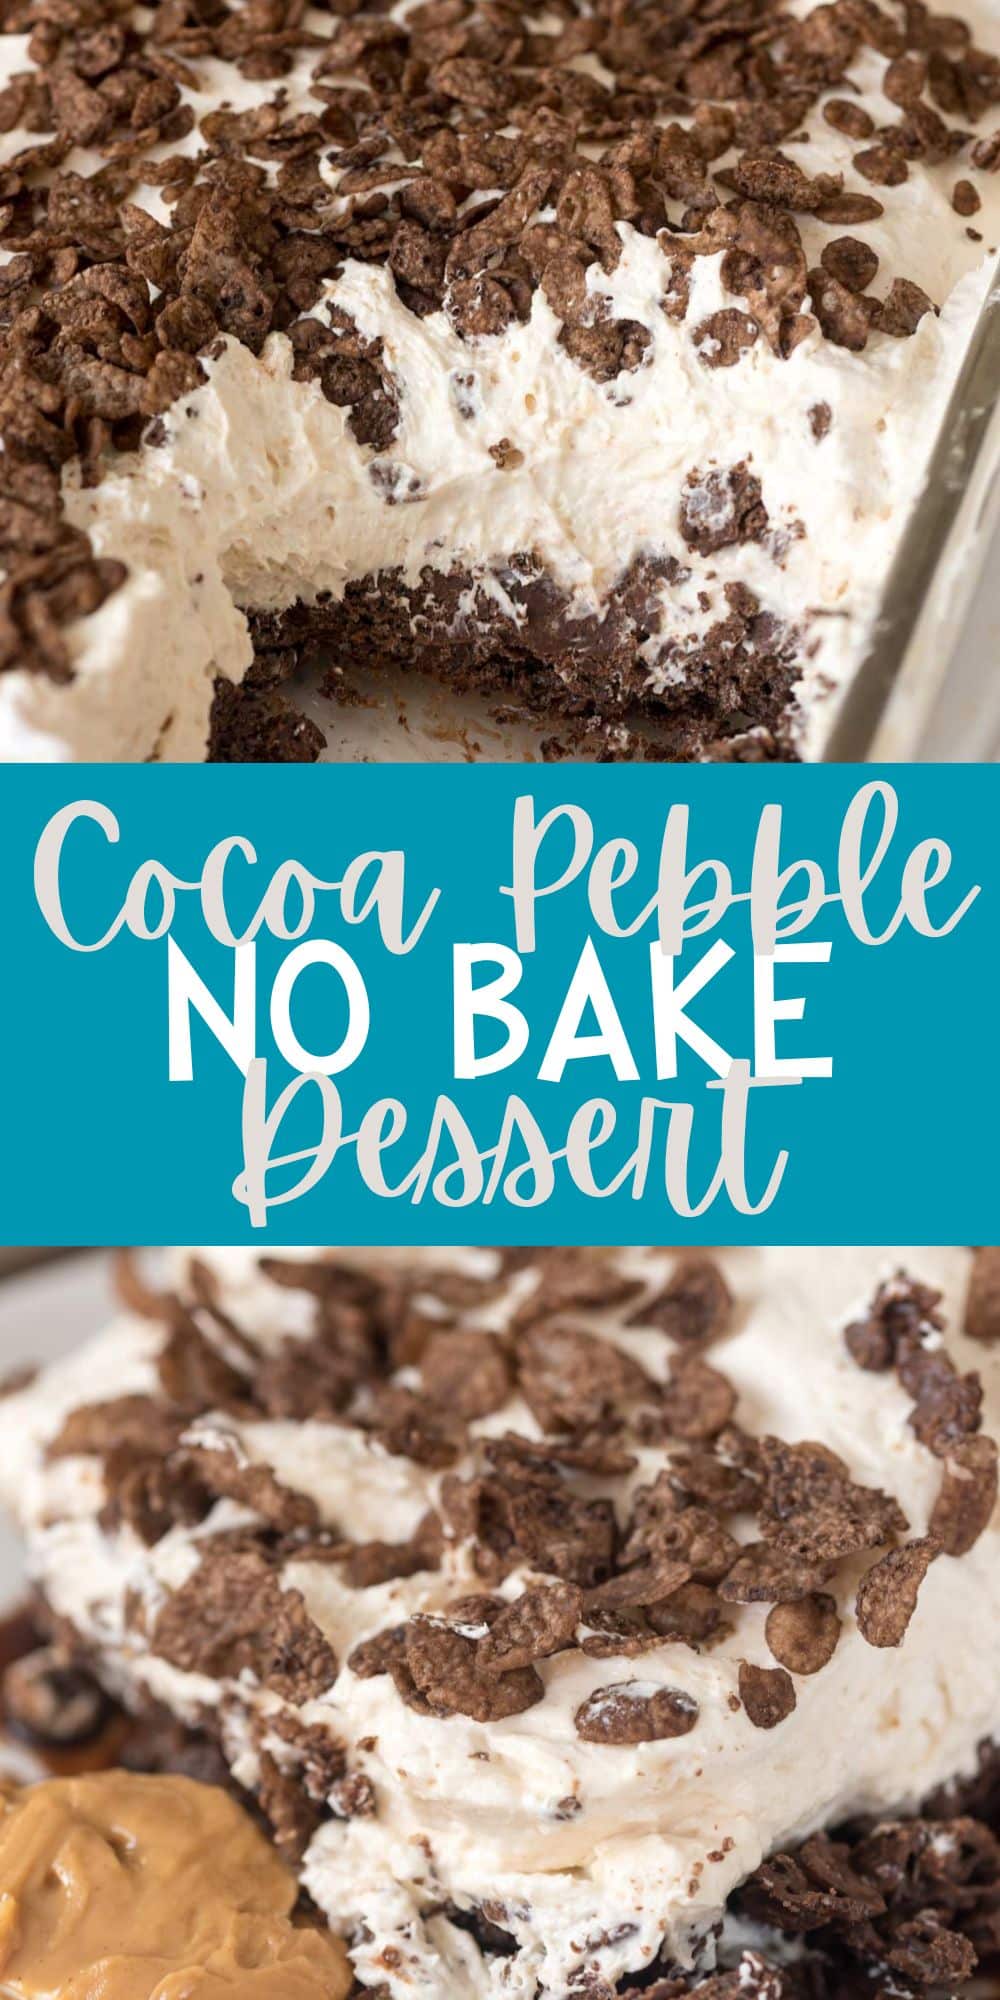 two photos of cocoa pebble dessert layered with chocolate and cream in a clear pan with words on the image.